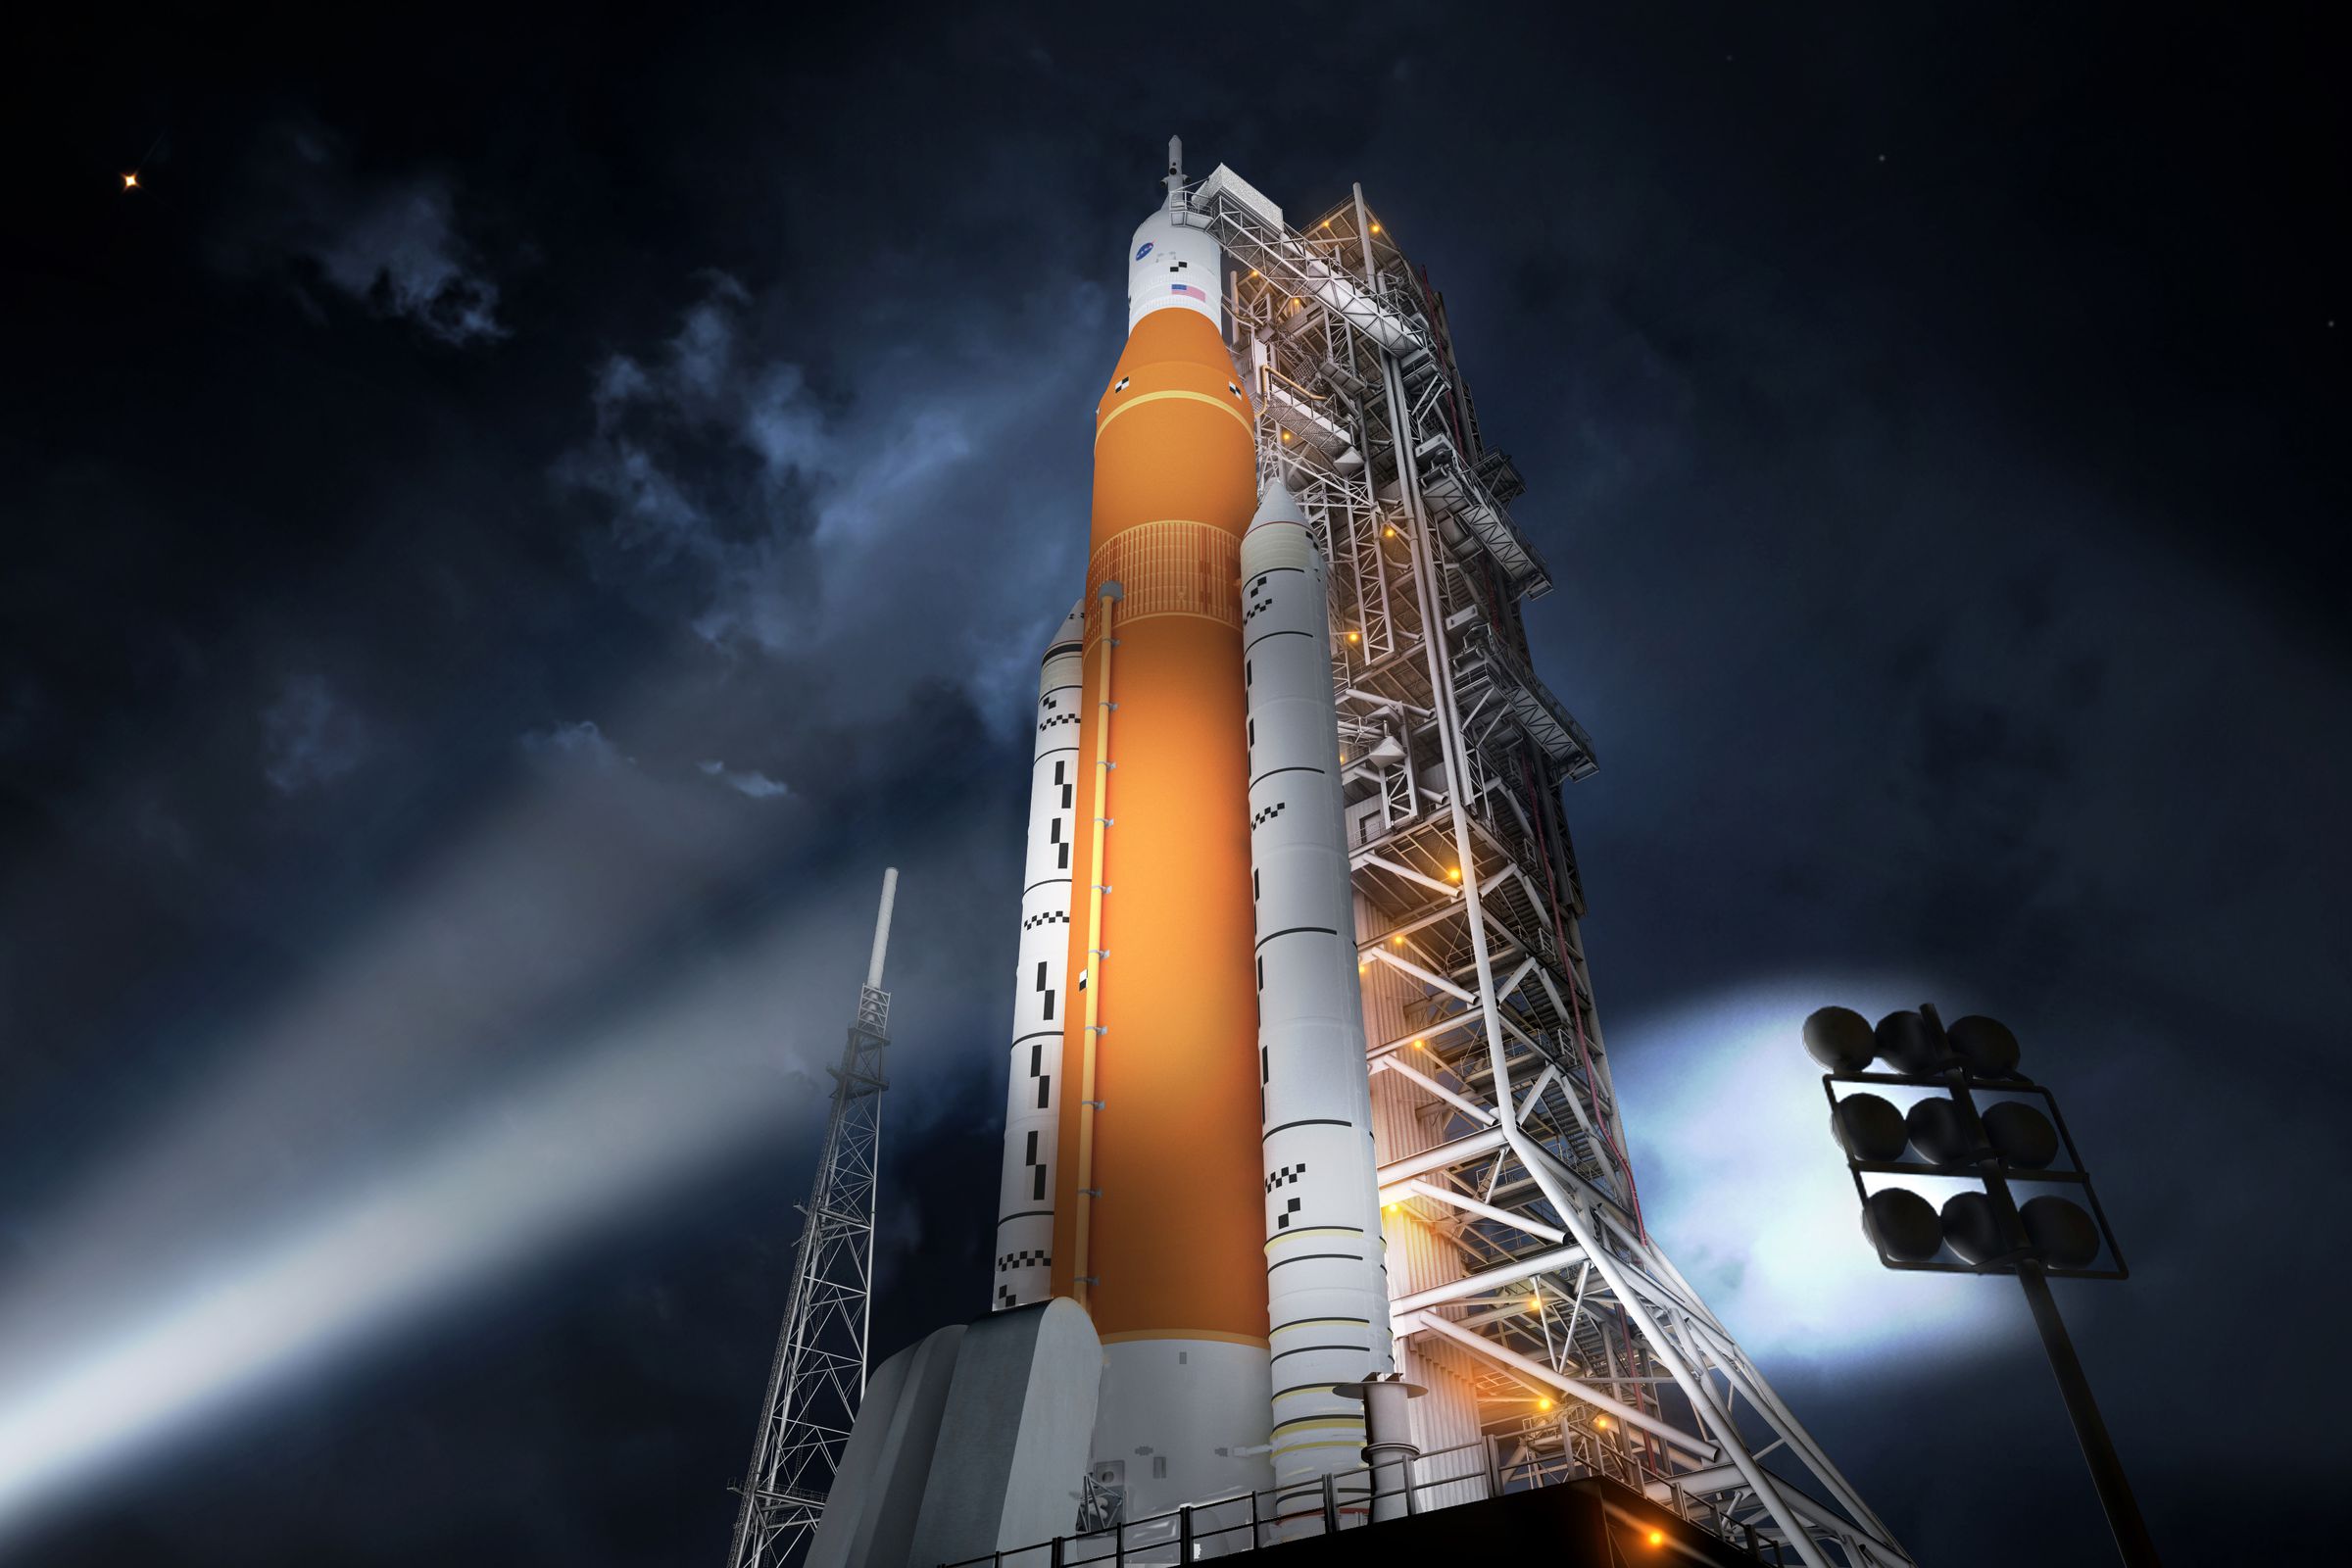 An artistic rendering of NASA’s next big rocket, the Space Launch System